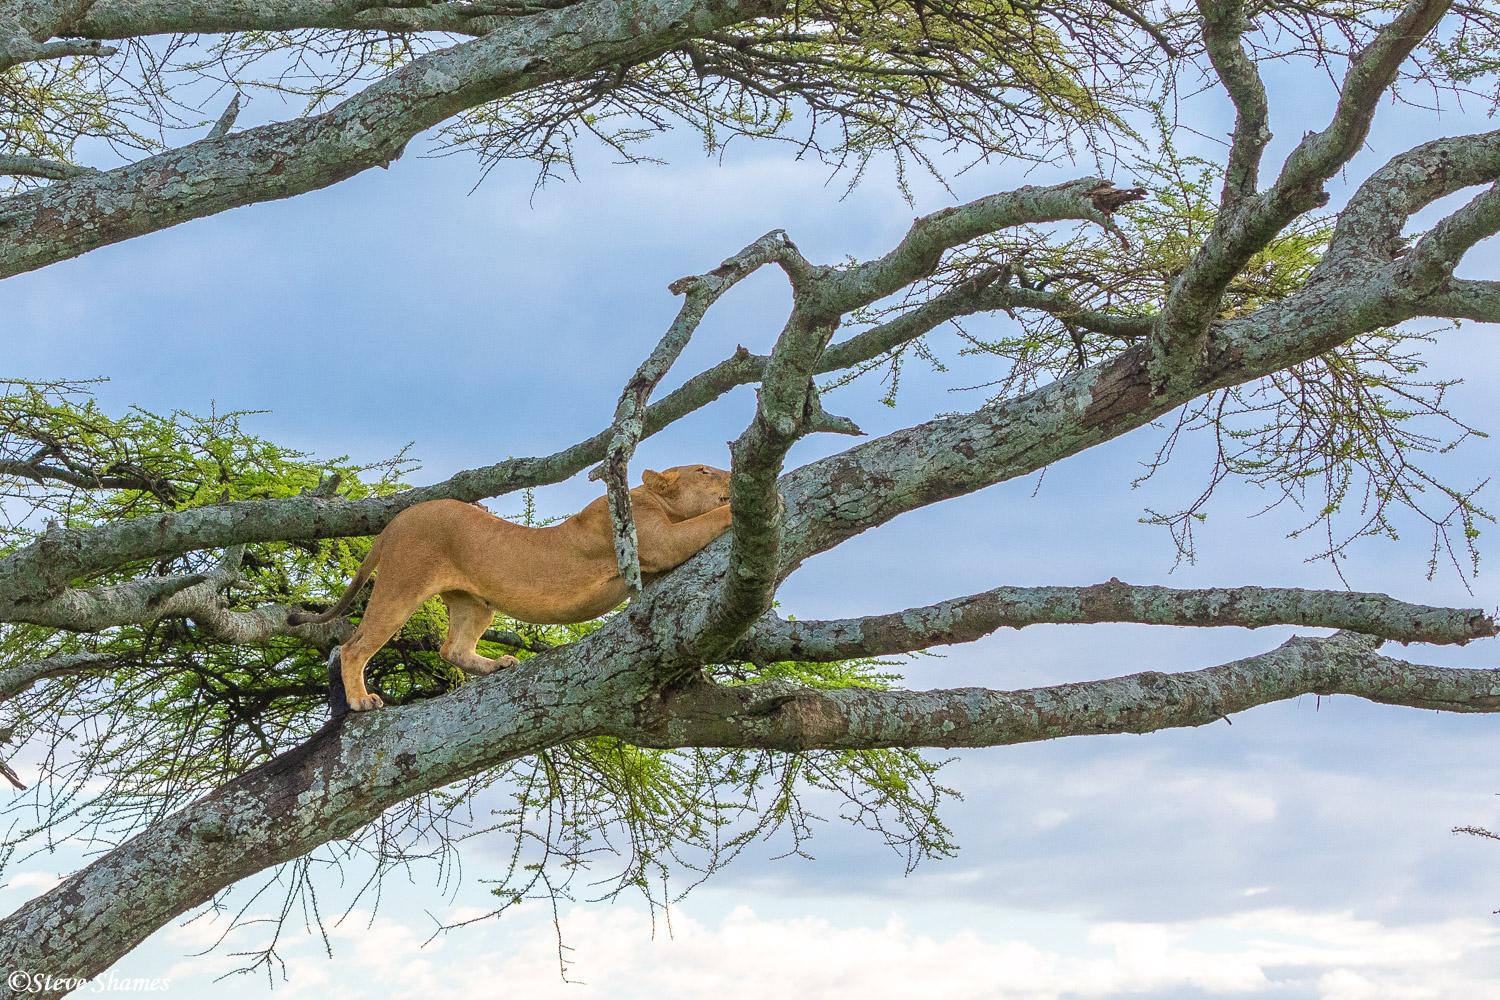 Here is a lioness stretching in a tree.